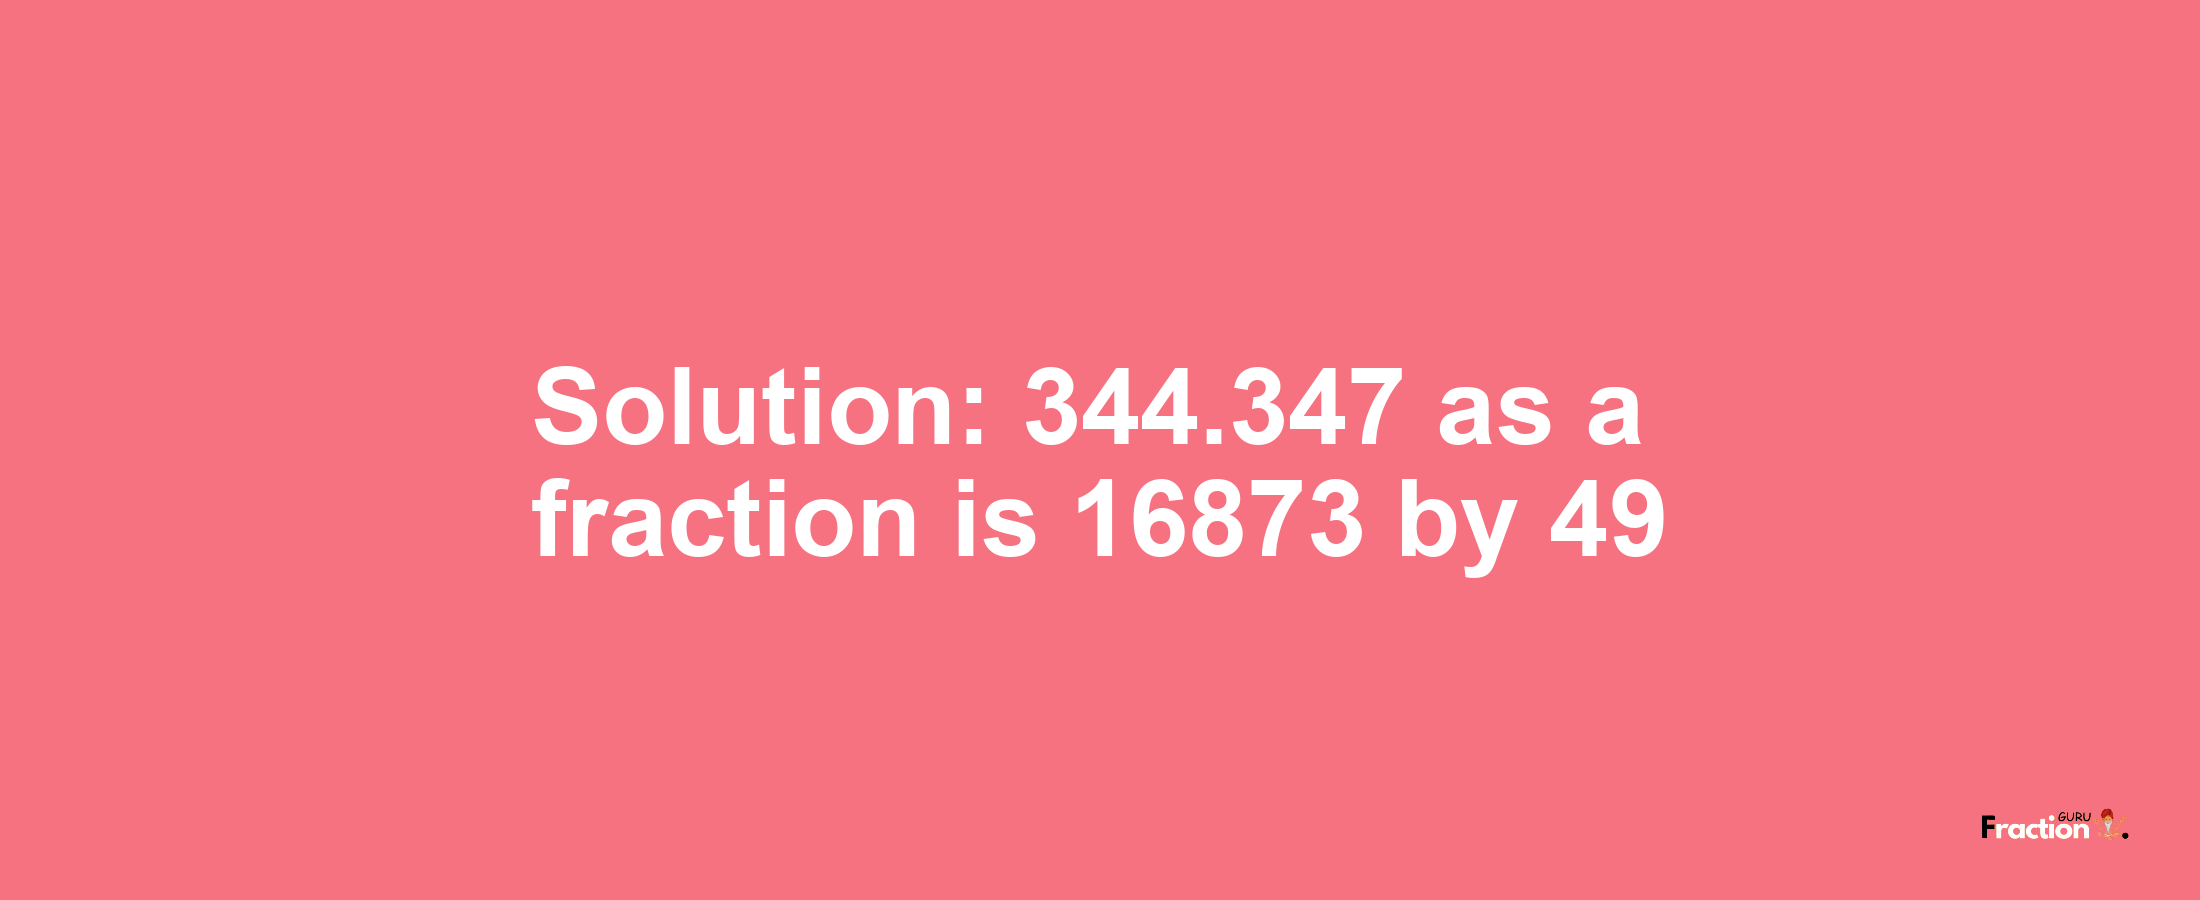 Solution:344.347 as a fraction is 16873/49